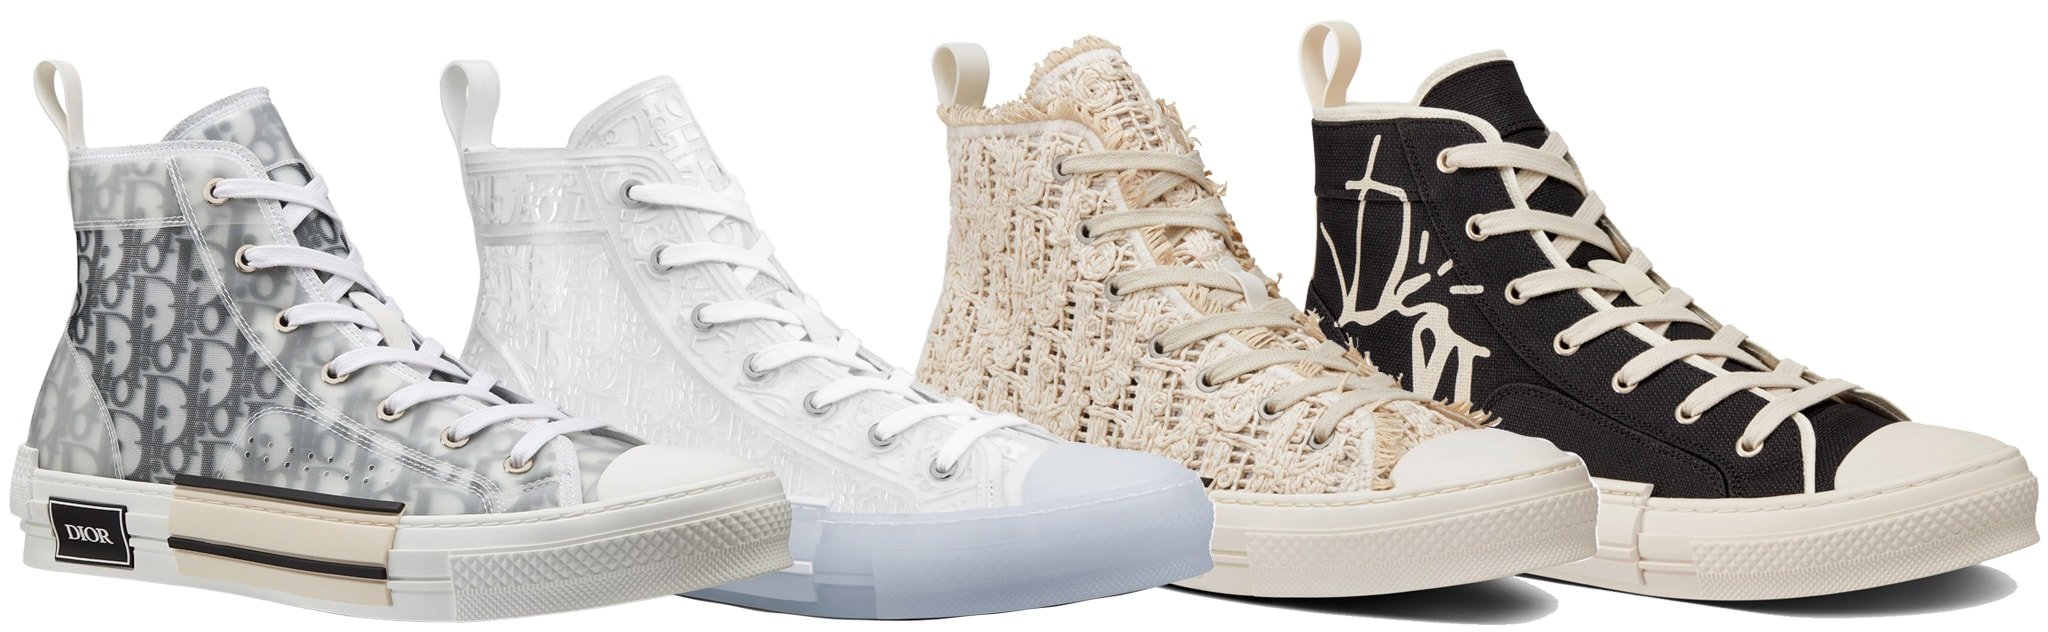 Dior's most popular high-top sneakers are the B23 high-top sneakers